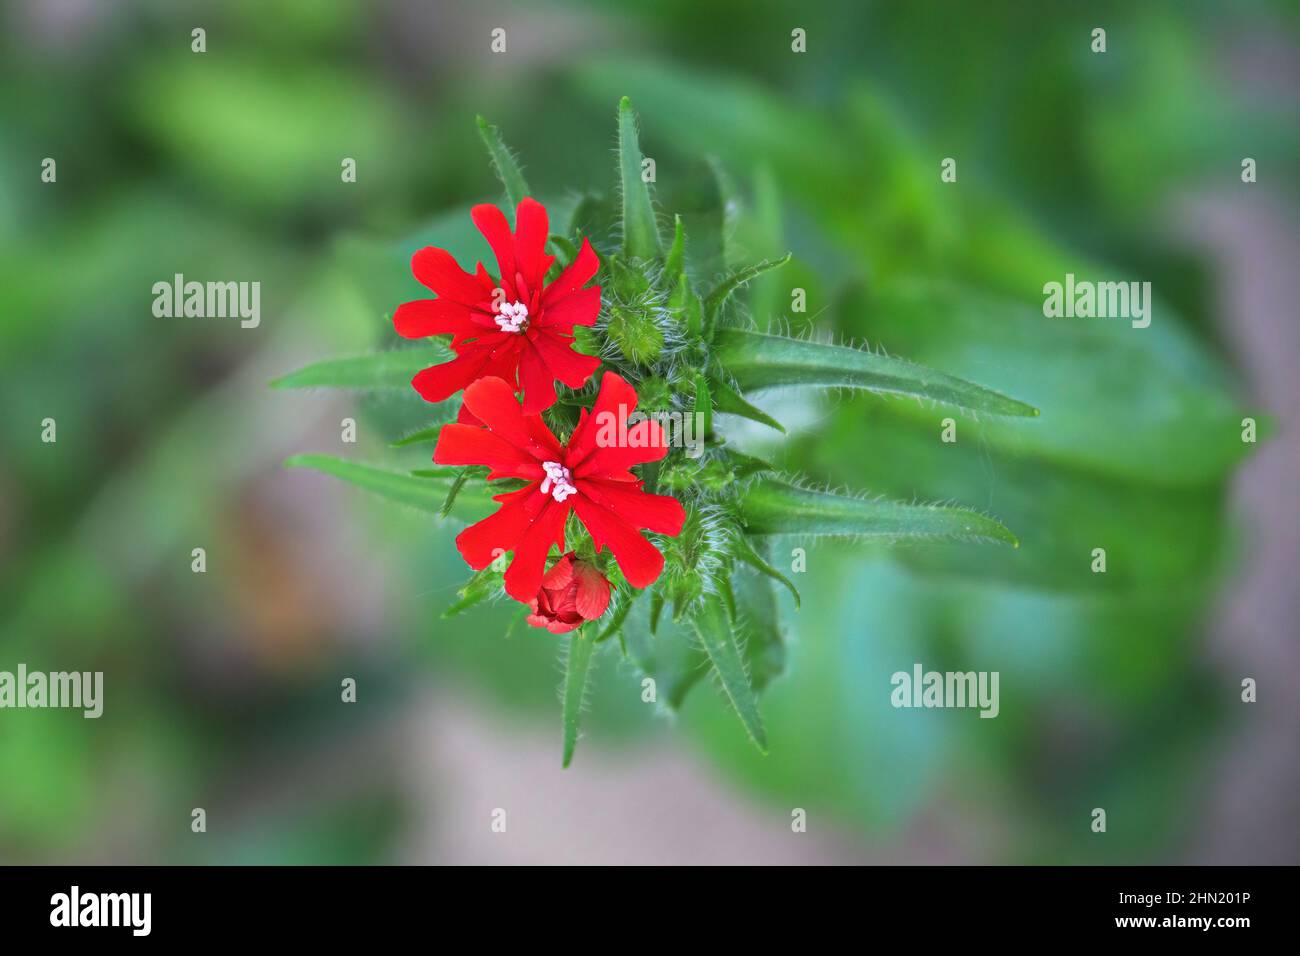 Closeup view of the red flowers on a maltese cross plant Stock Photo